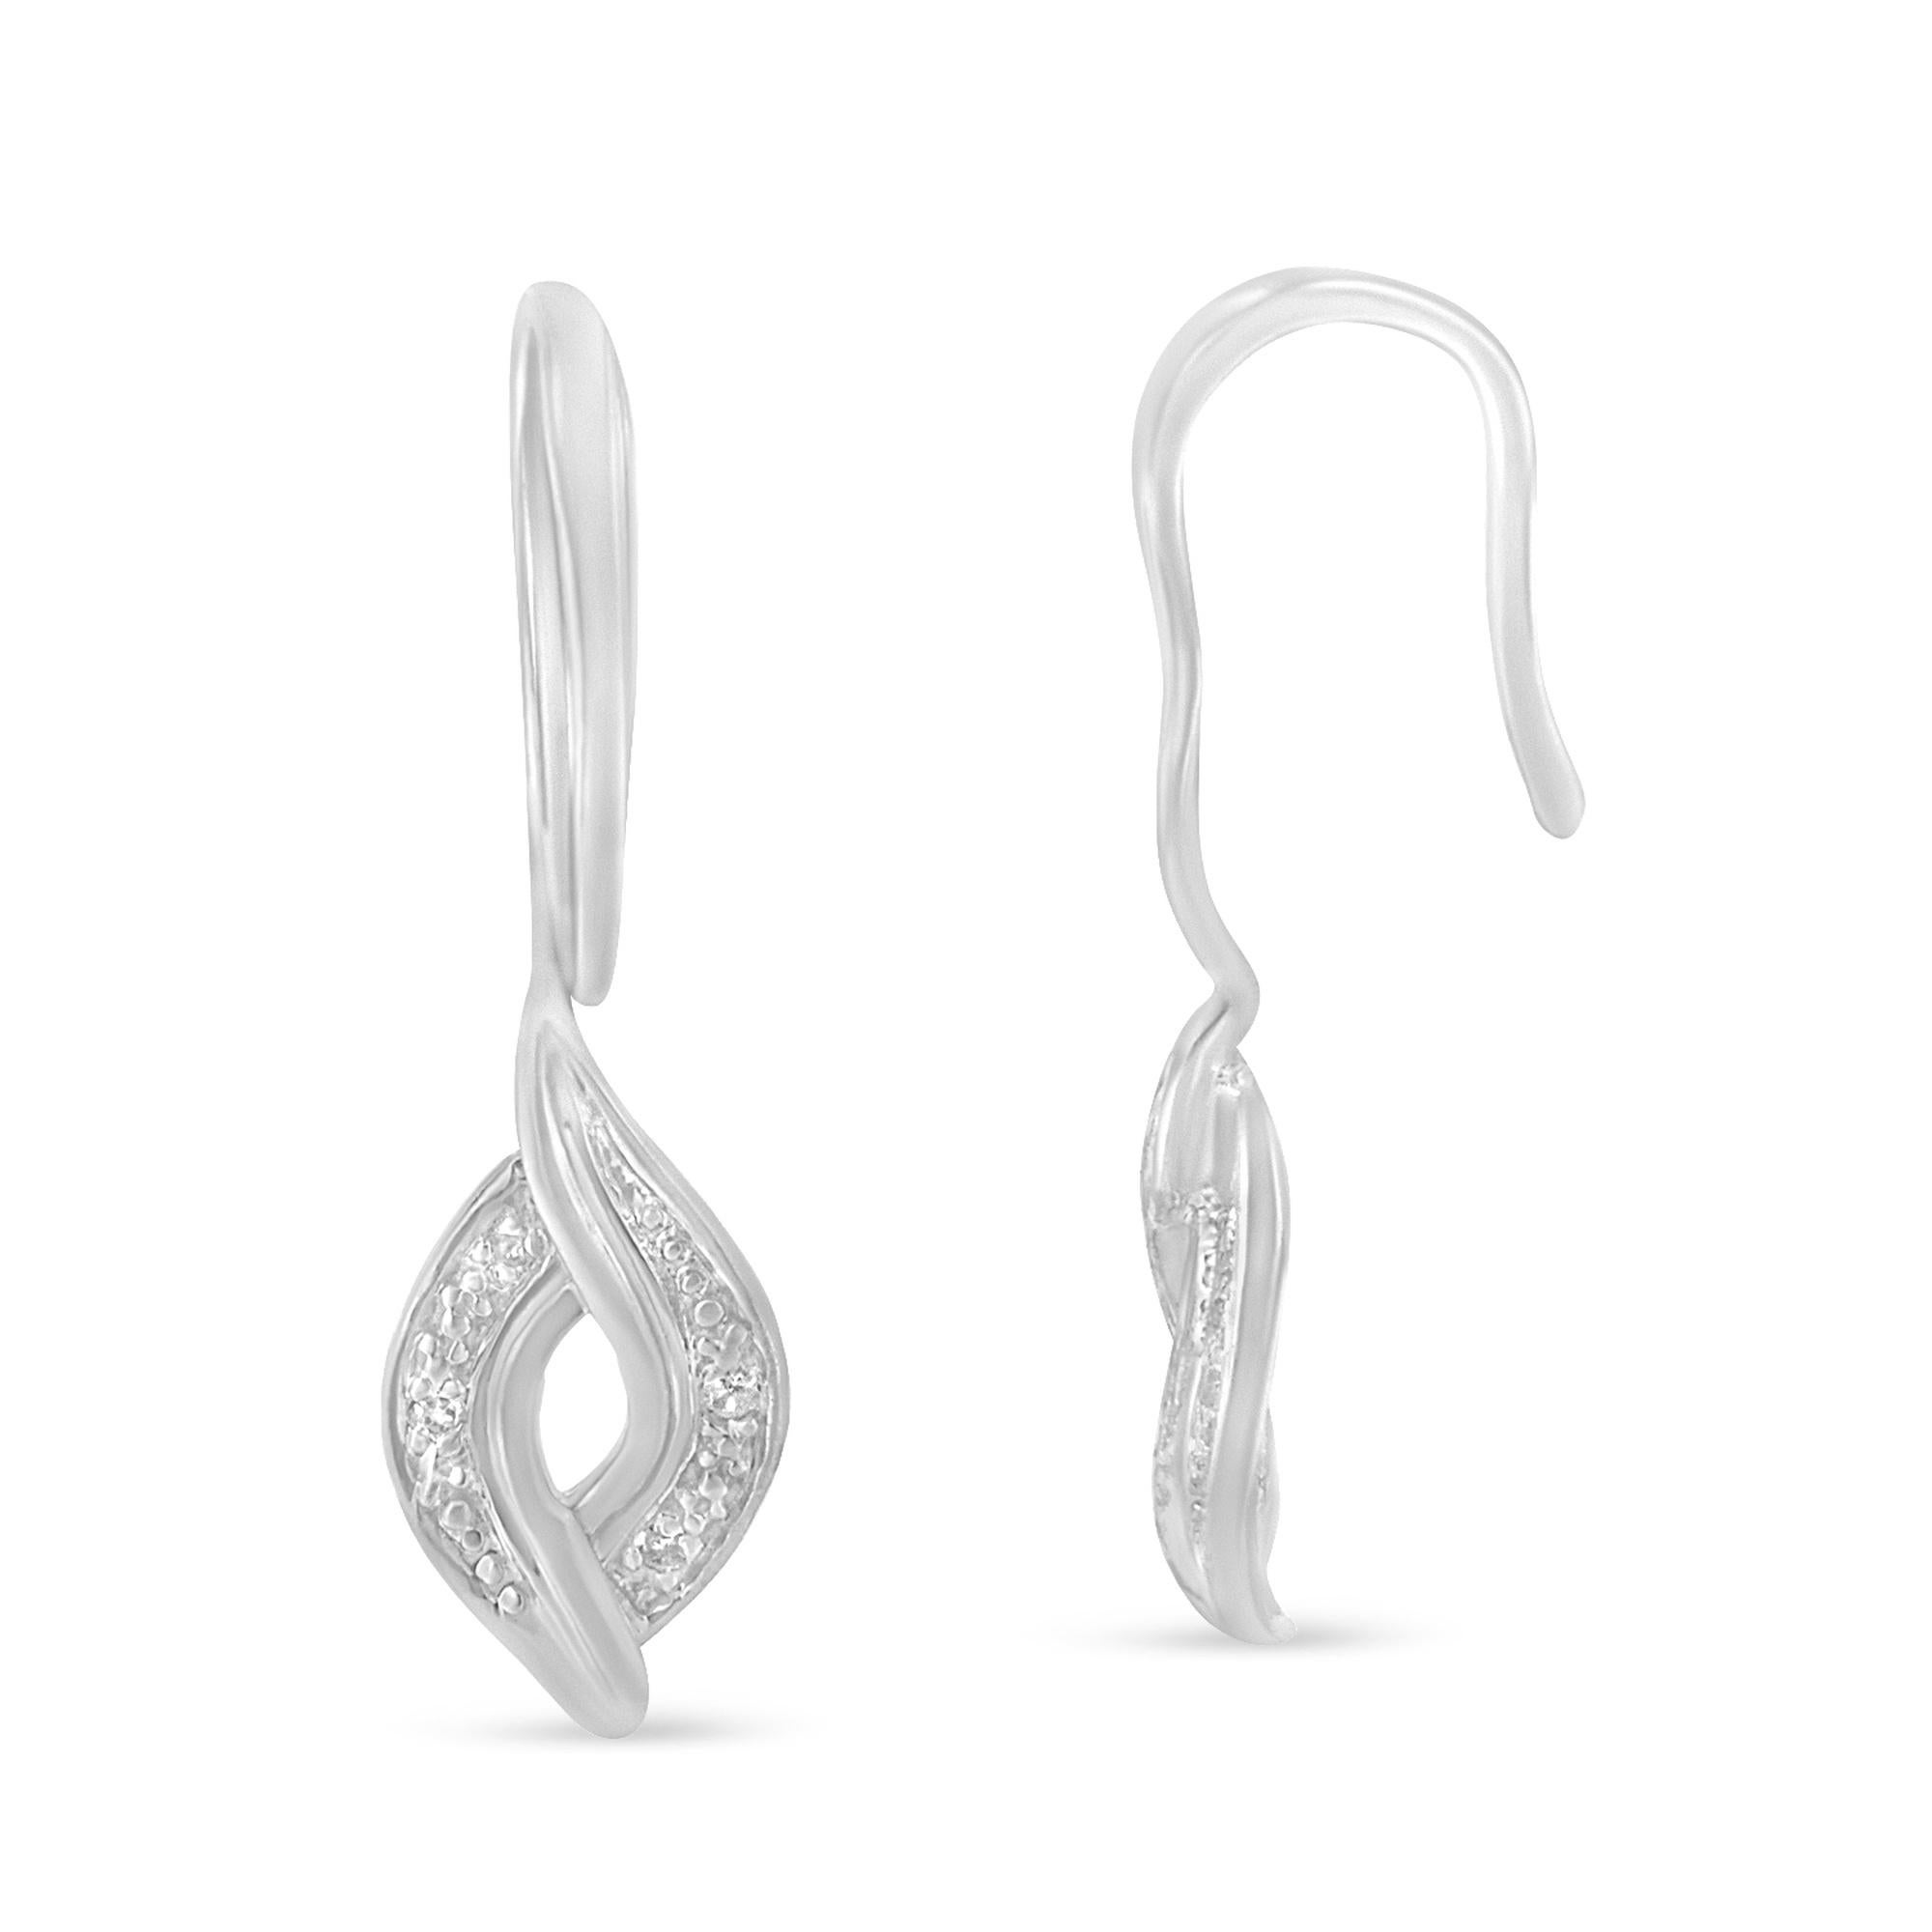 Upgrade your party look with these gorgeous dangle earrings. Polished high to shine, the earrings are composed of sterling silver. Designed in a unique shape, the earrings are embellished with round cut diamonds that are arranged in a prong setting.